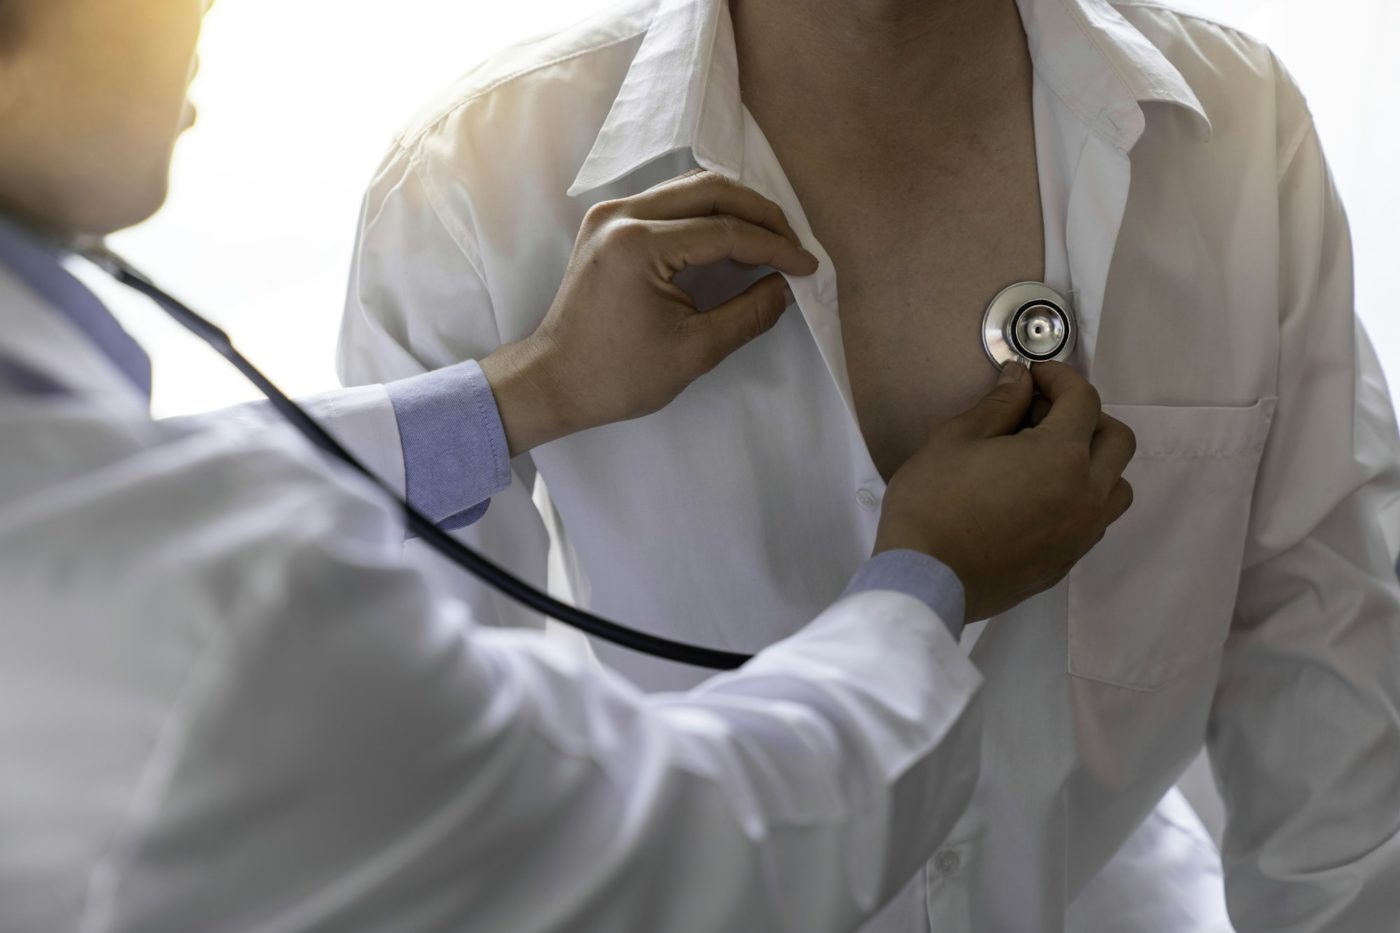 The doctor uses a heart stethoscope. To examine patients with cardiovascular disease, present sympto